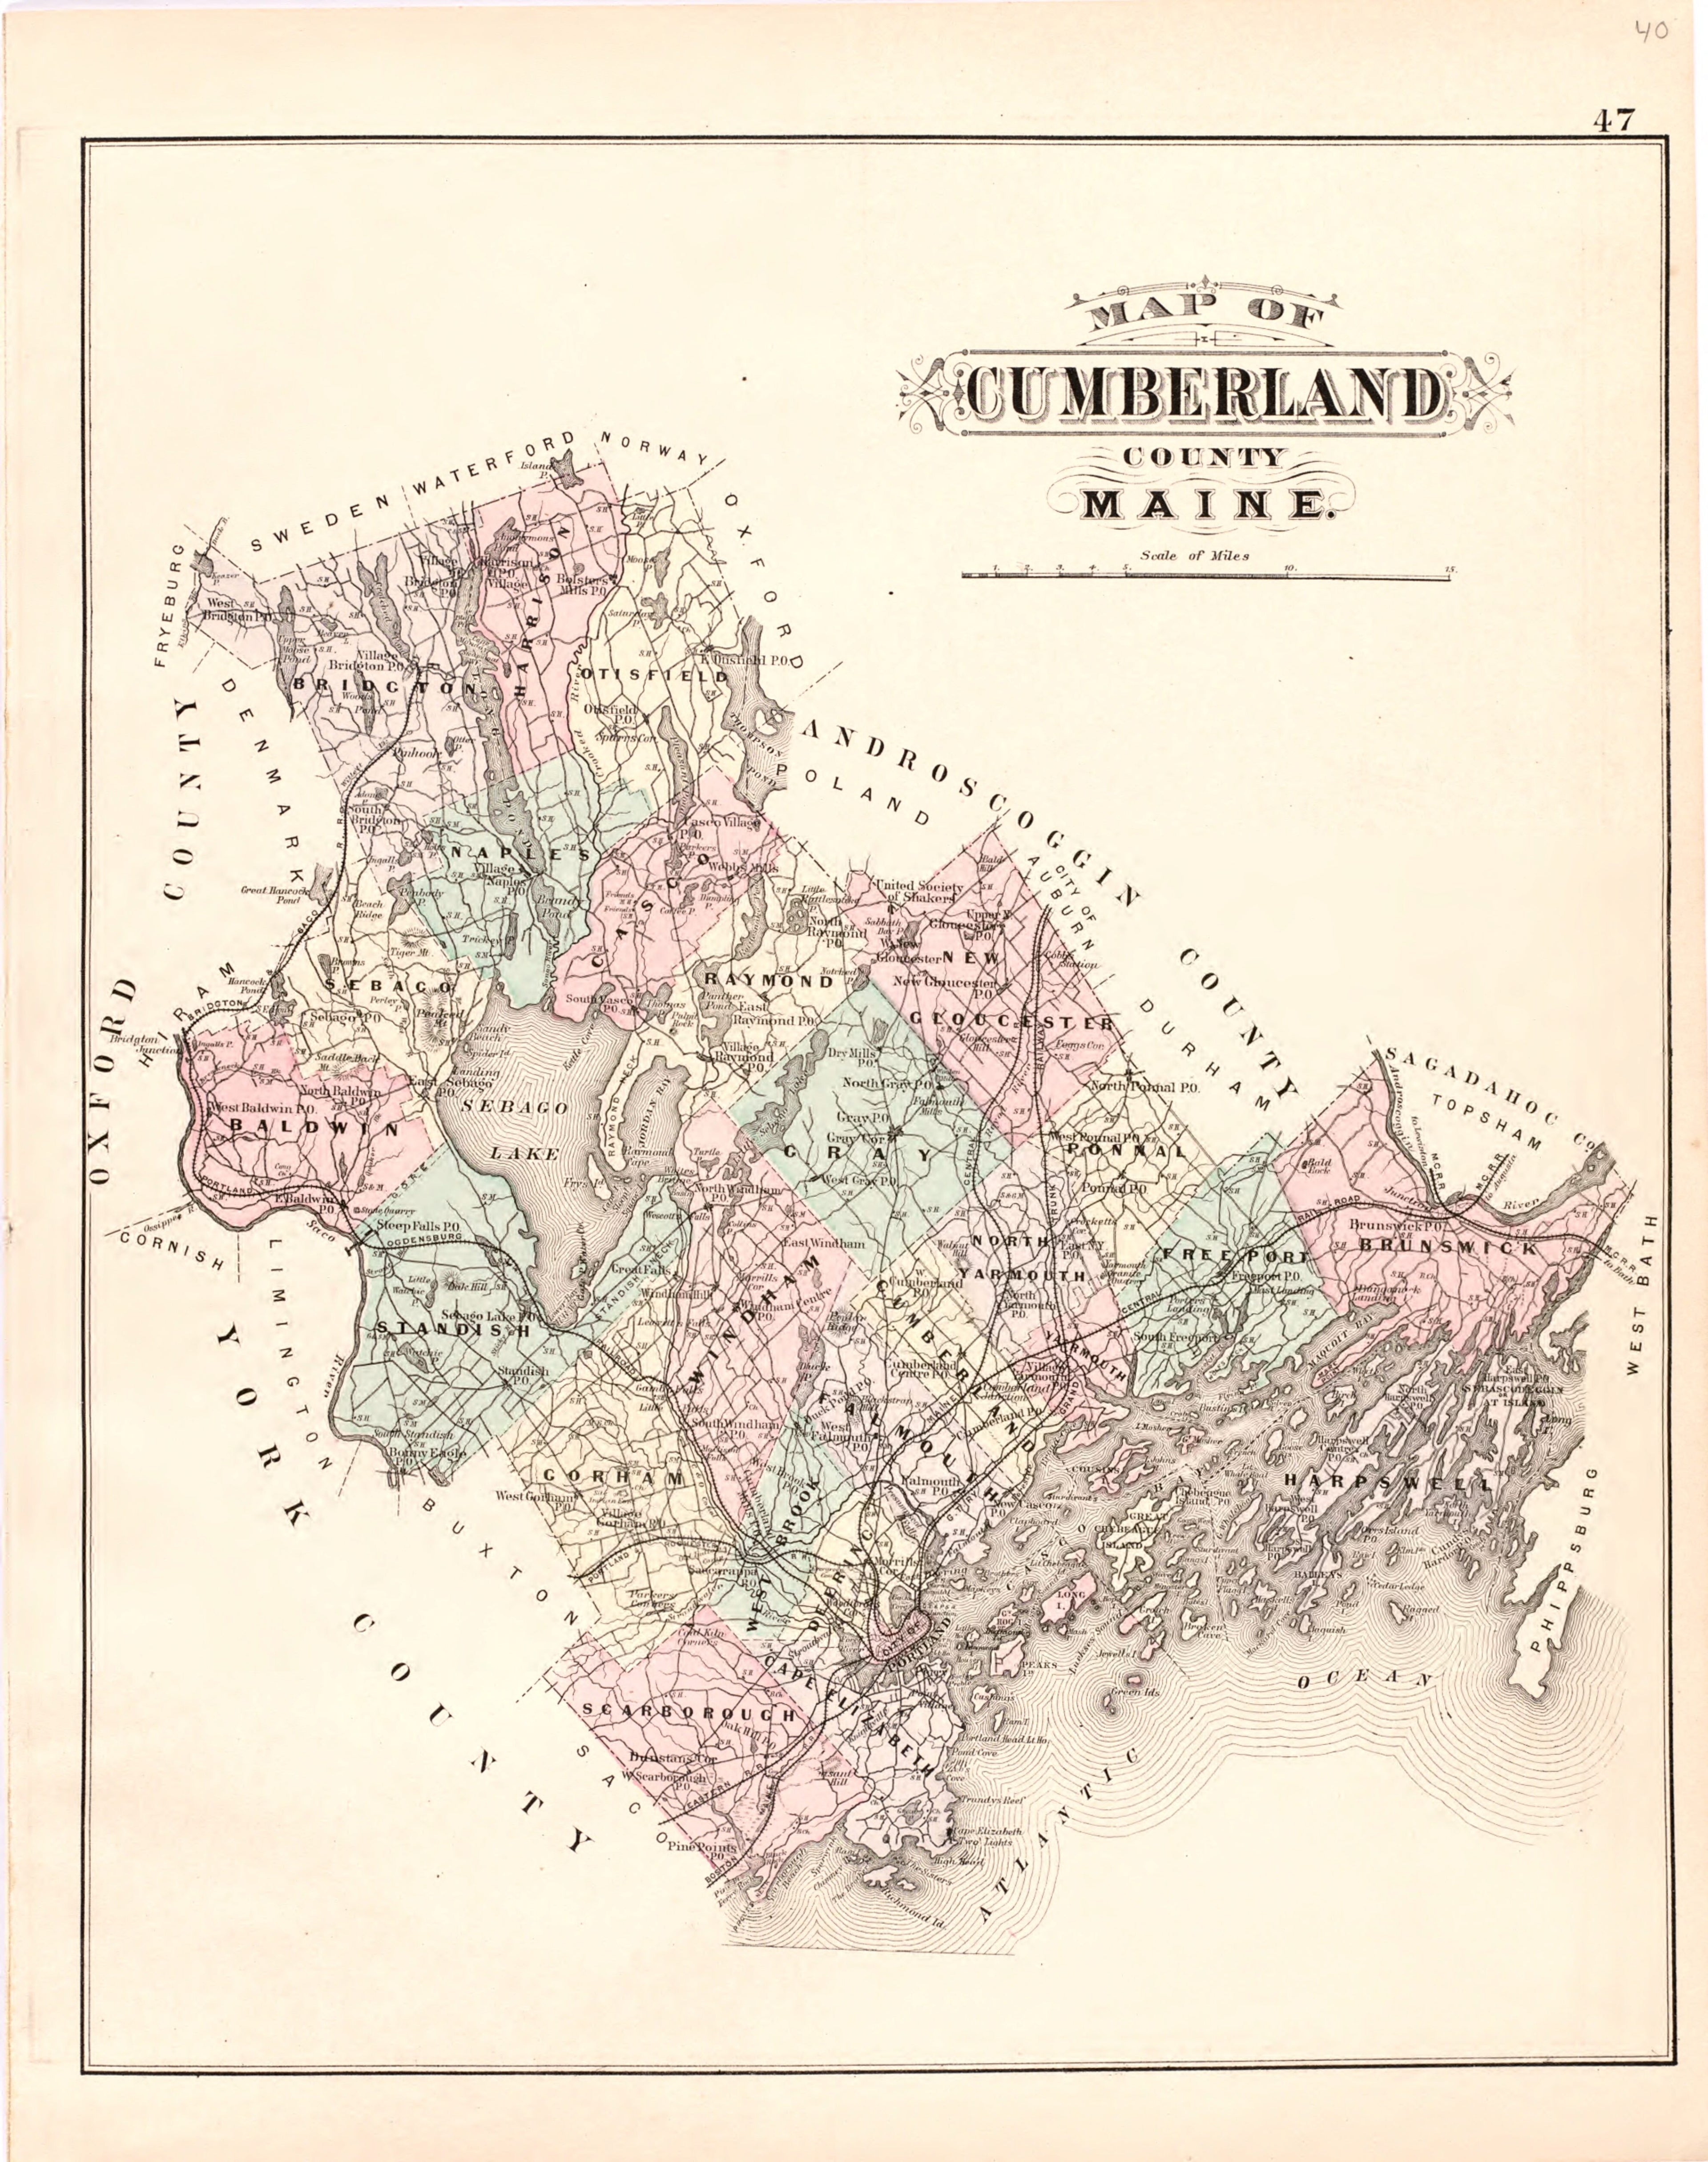 This hand drawn illustration (map) of Map of Cumberland County Maine from Colby&